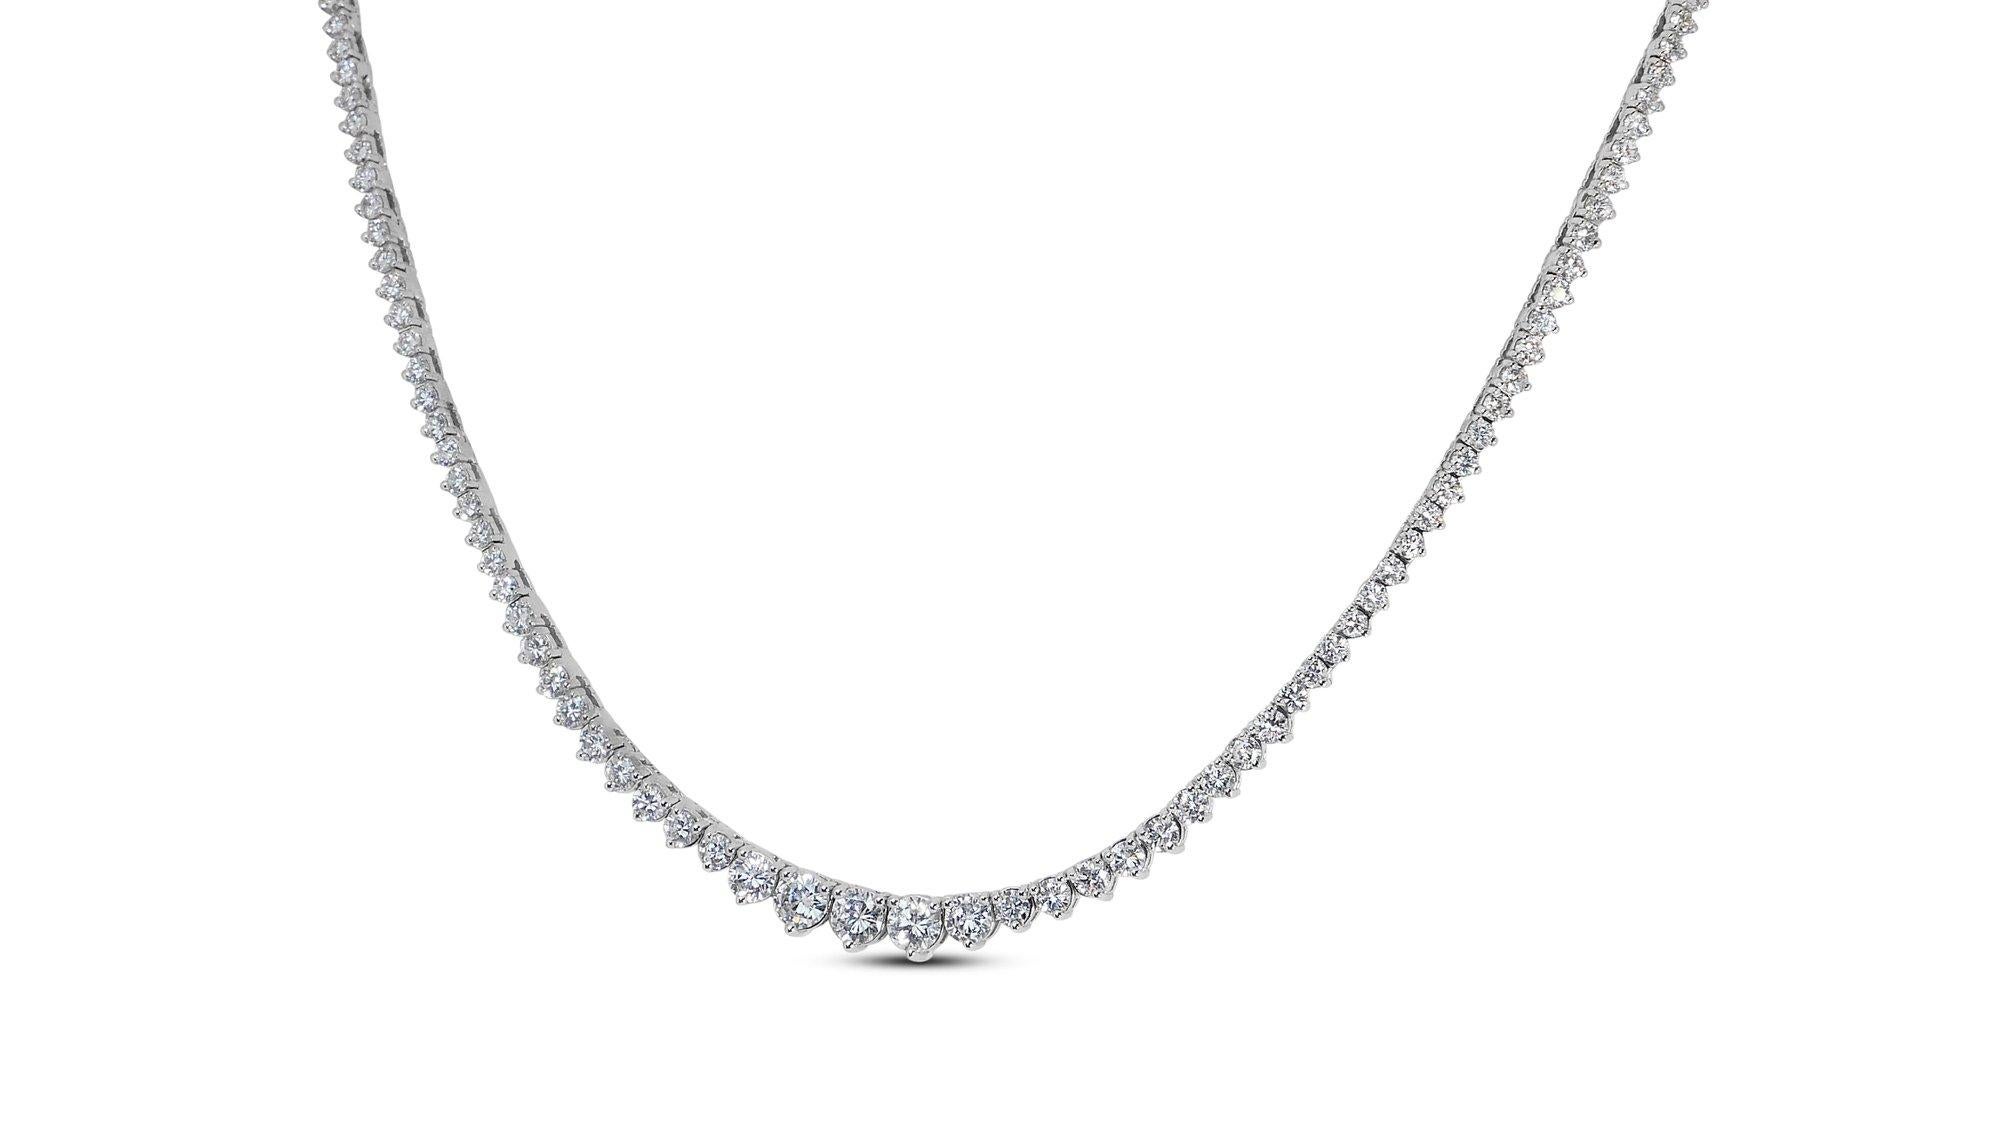 Luxurious 18k White Gold Diamond Necklace w/7.63 ct - IGI Certified

This exquisite 18k white gold diamond necklace is a testament to timeless elegance and unparalleled craftsmanship, featuring a breathtaking ensemble of 196 round diamonds that